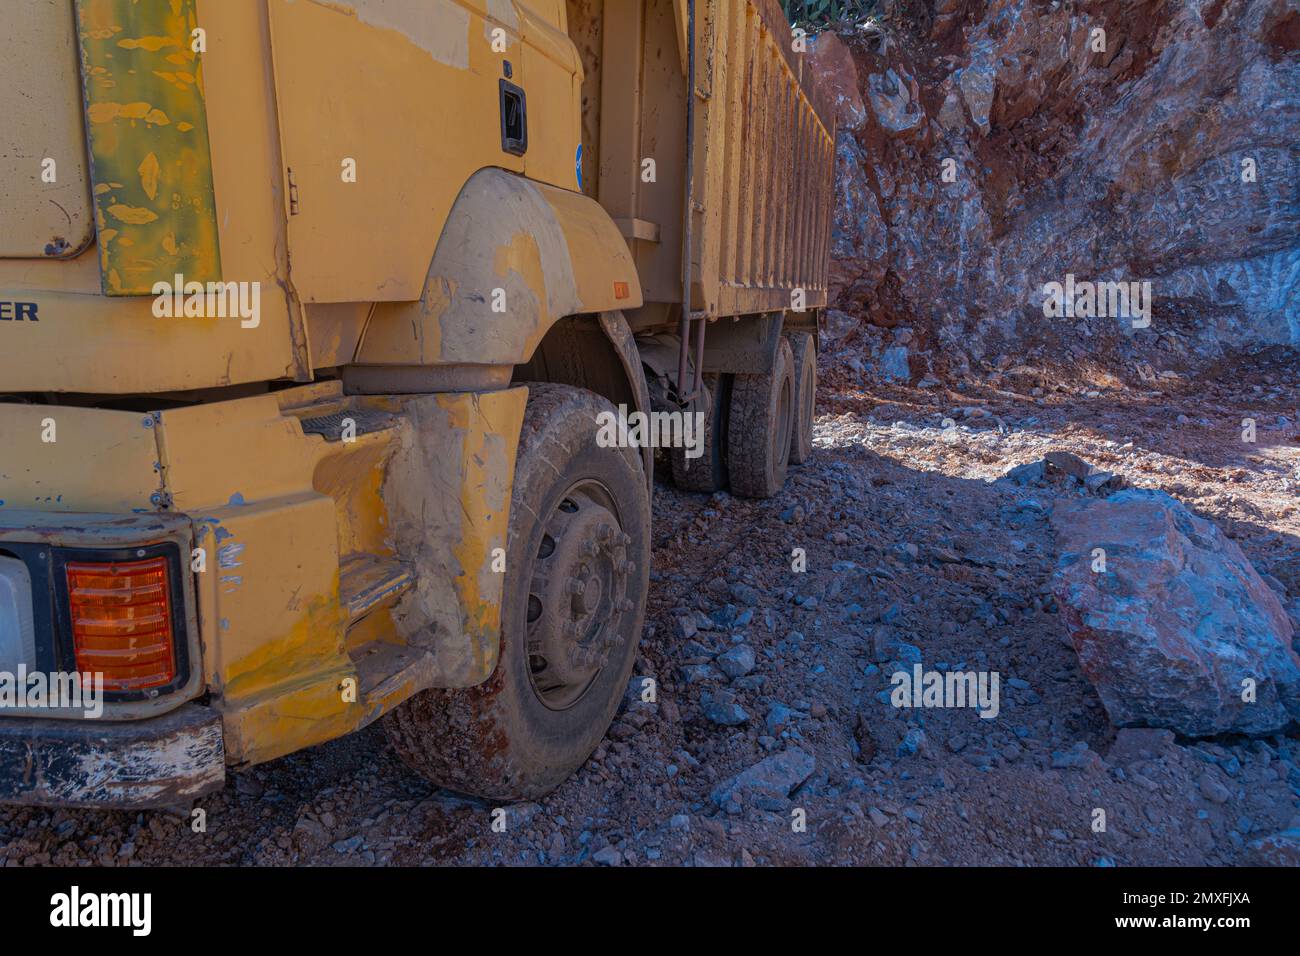 Heavy machinery works at the construction site. Clearing rocky soil for construction in Turkey. Wheels of a vintage yellow truck. Stock Photo